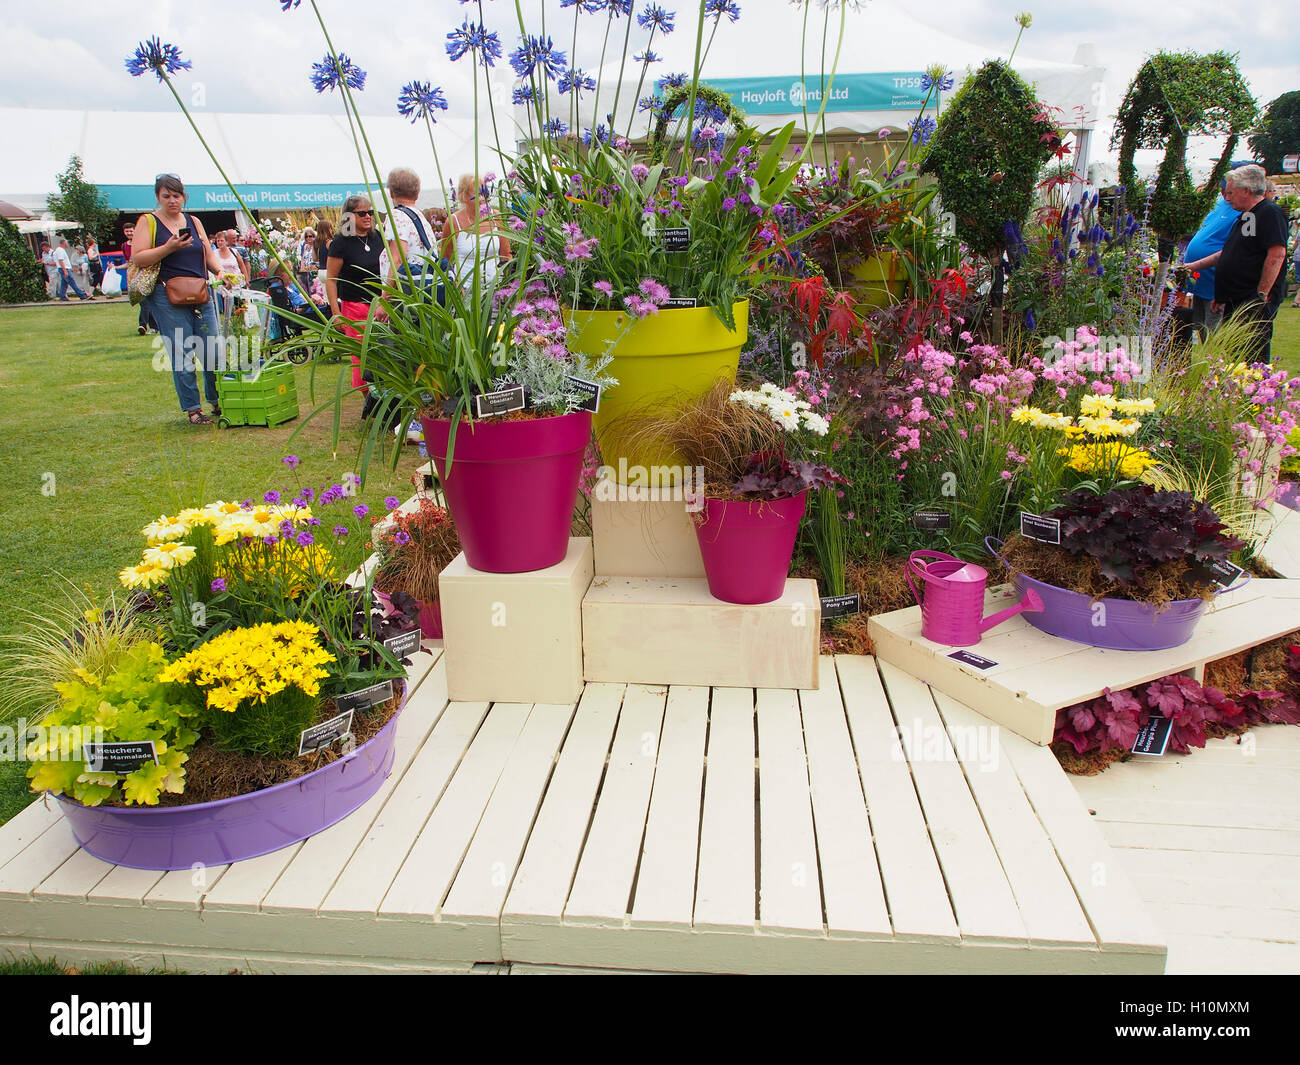 Display of various flowers growing in pink pots, with visitors in the background. Tatton Park Flower Show 2016 in Cheshire, UK. Stock Photo